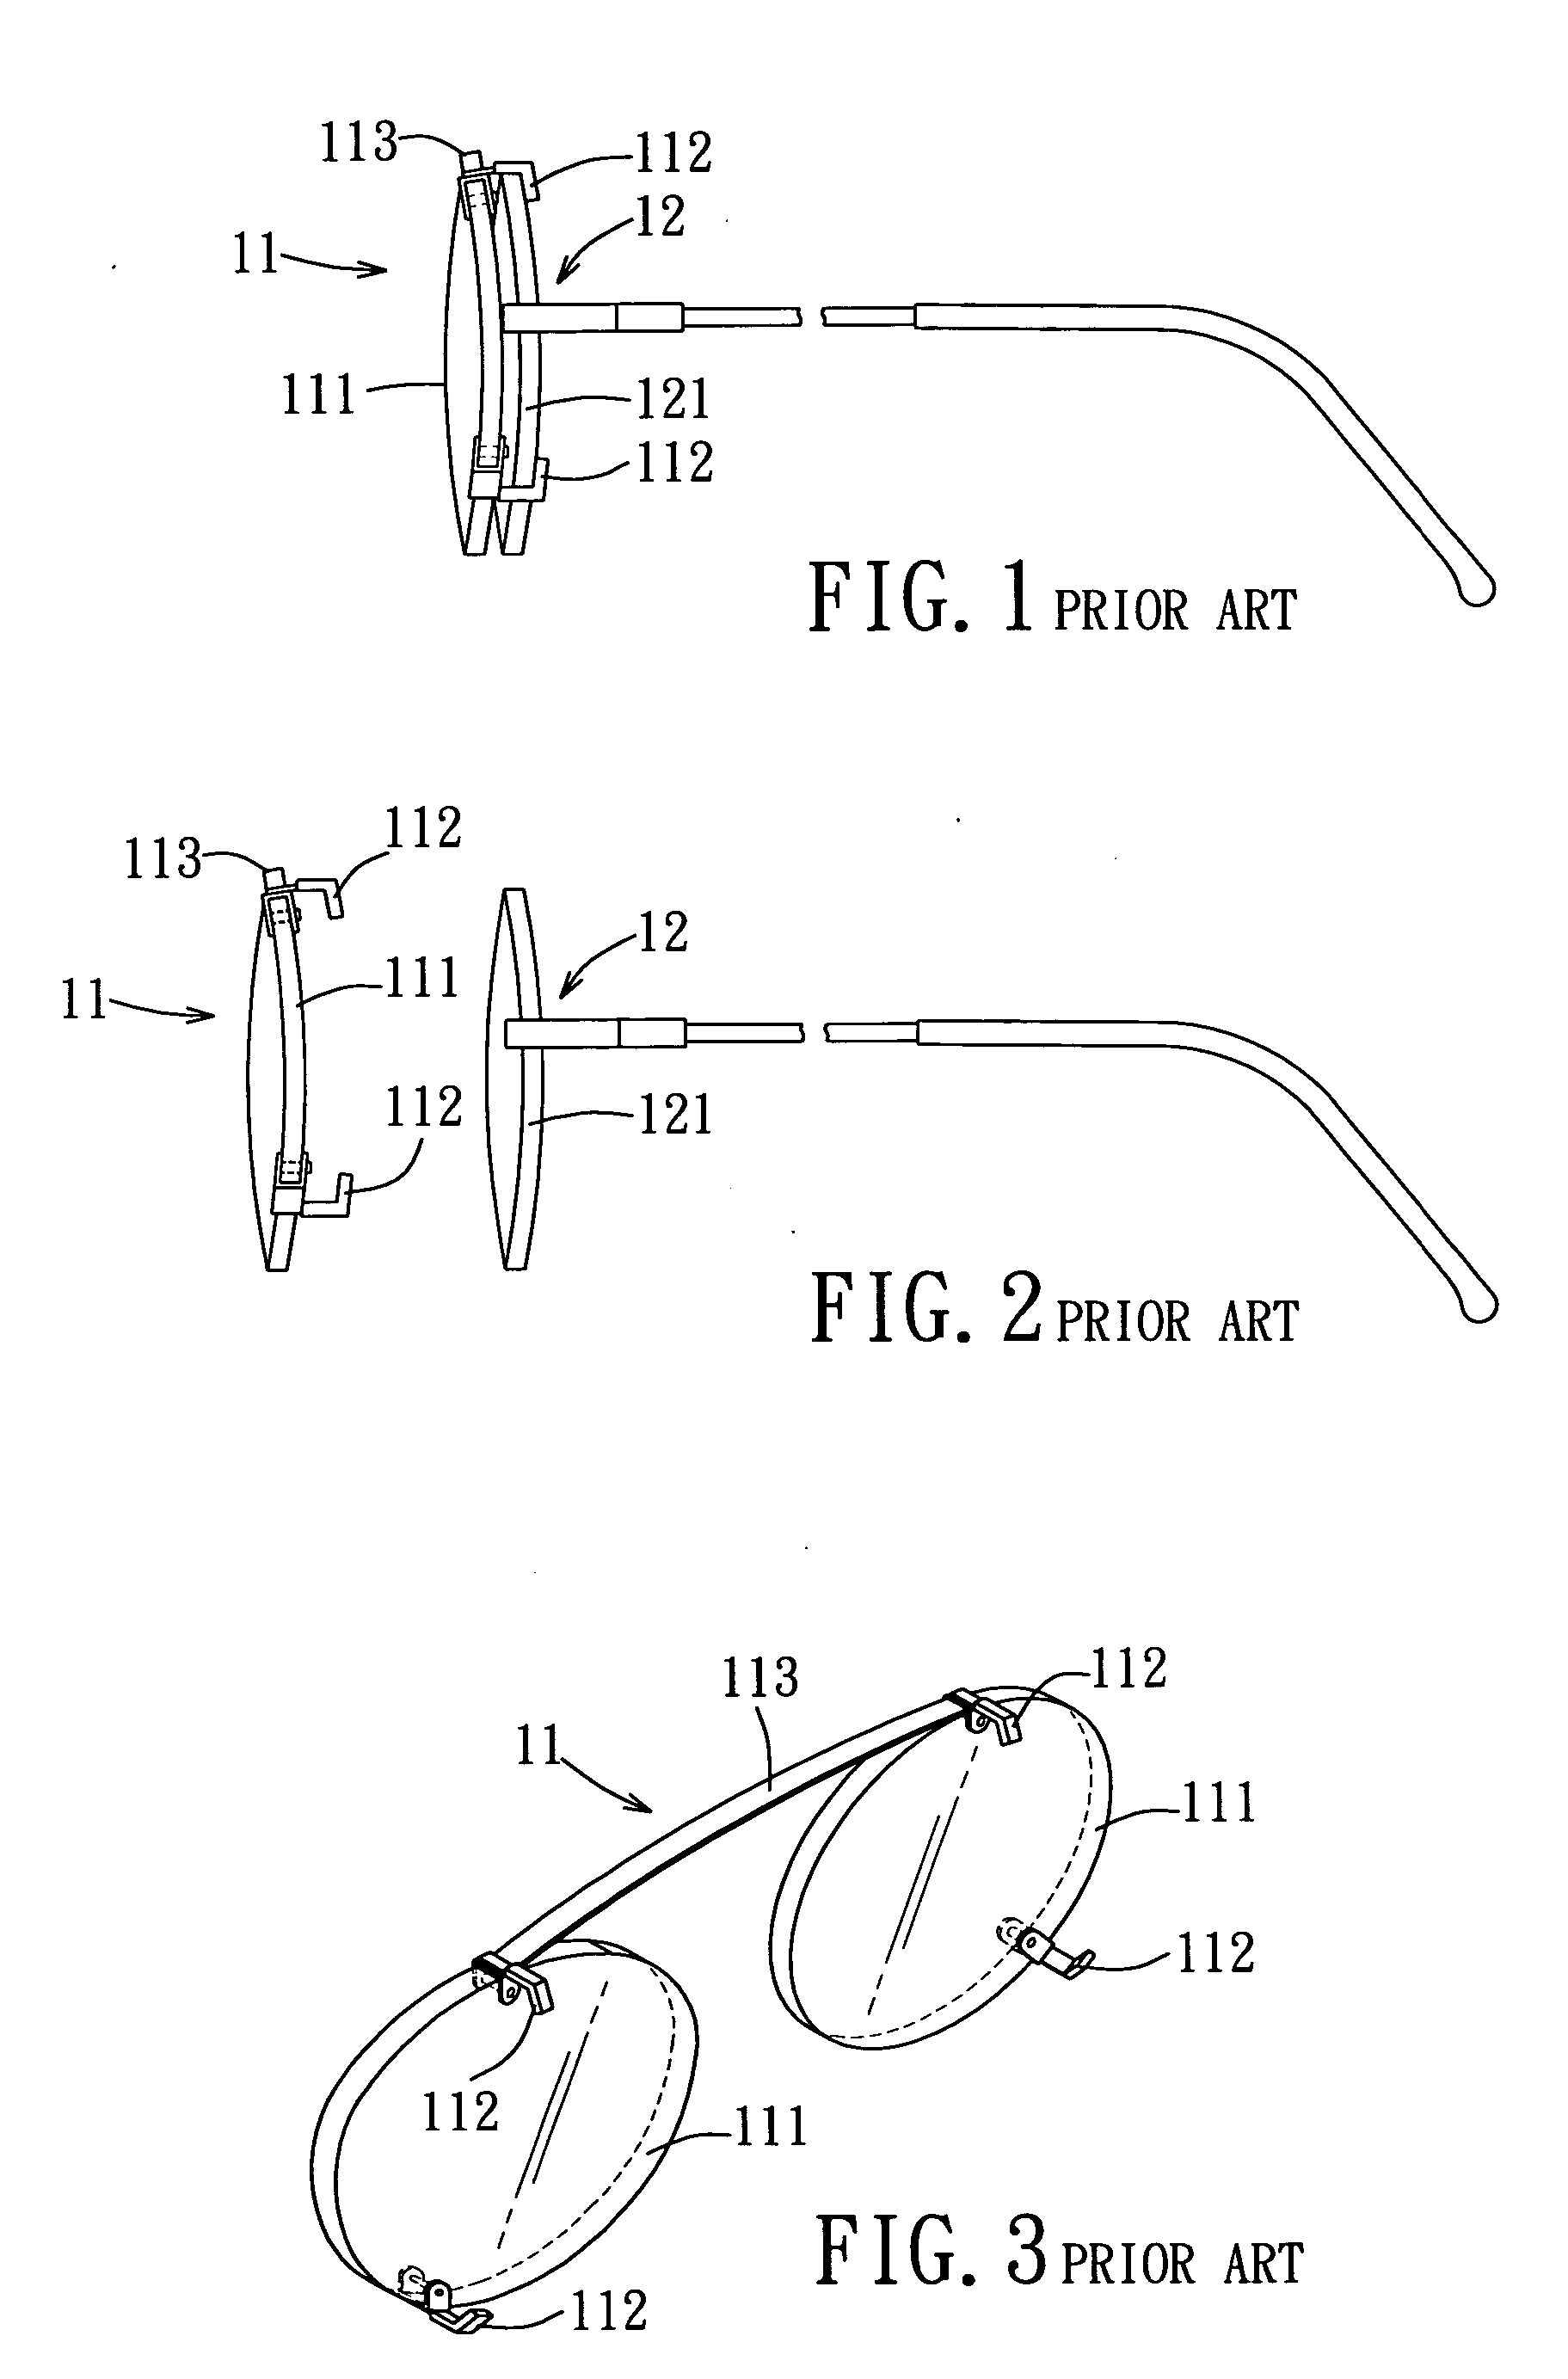 Auxiliary eyeglasses with two aligned springs for biasing two lens units to move relative to each other